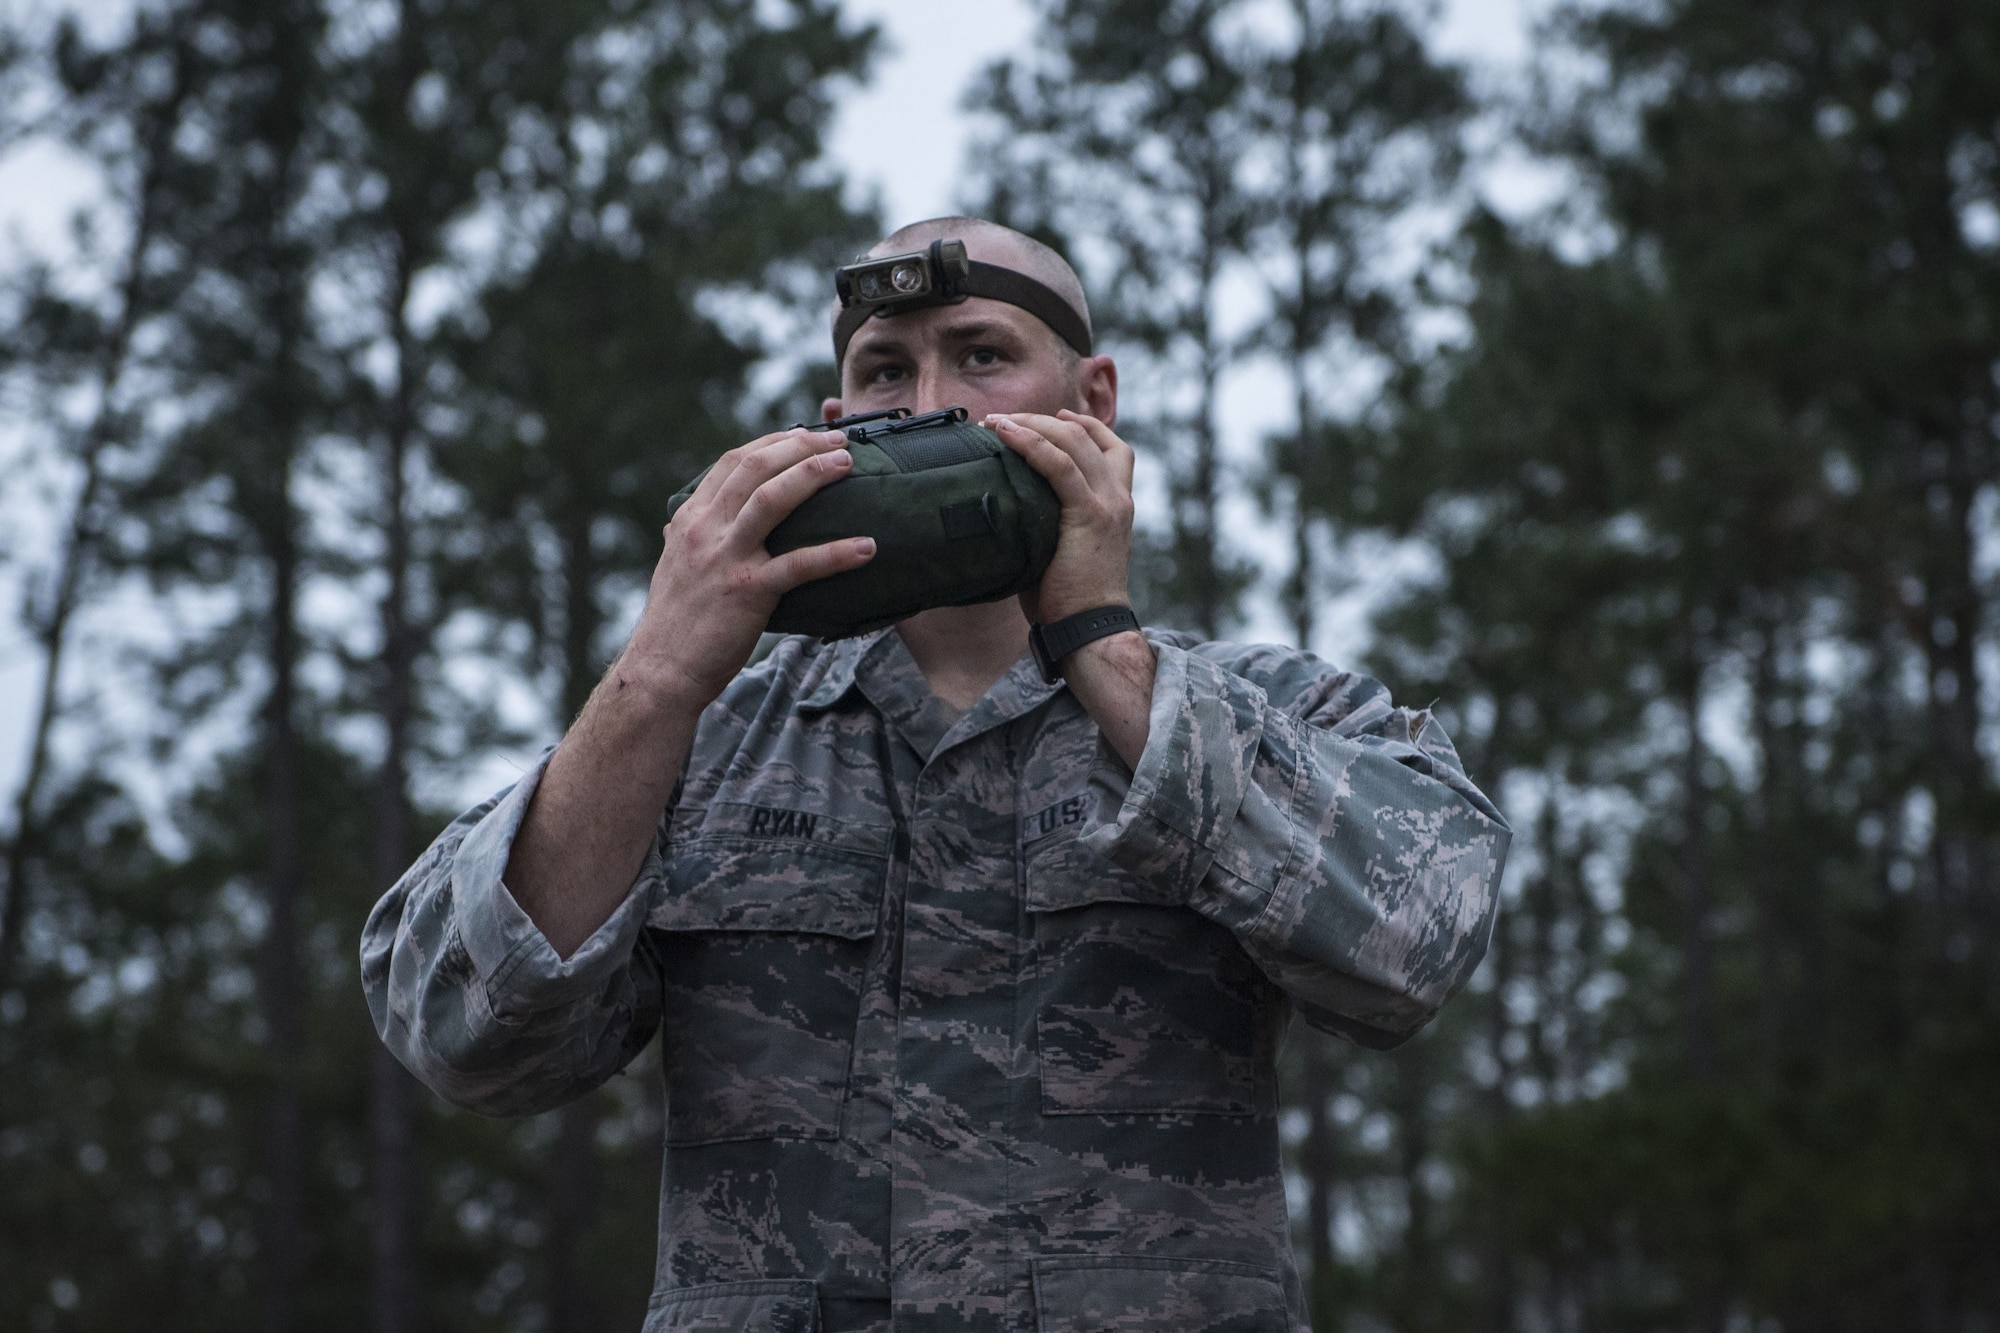 An Airman hydrates after completing a 12-mile ruck march during a Pre Ranger Assessment Course, Feb. 11, 2018, at Moody Air Force Base, Ga. The three-day assessment is designed to determine whether Airmen are ready to attend the Air Force Ranger Assessment Course held at Fort Bliss Army Post, Texas. Ranger cadre test Airmen’s physical fitness, tactical abilities, land navigation skills, leadership qualities, water confidence and academic ability to determine if they have the knowledge and will to become Rangers. (U.S. Air Force photo by Senior Airman Janiqua P. Robinson)